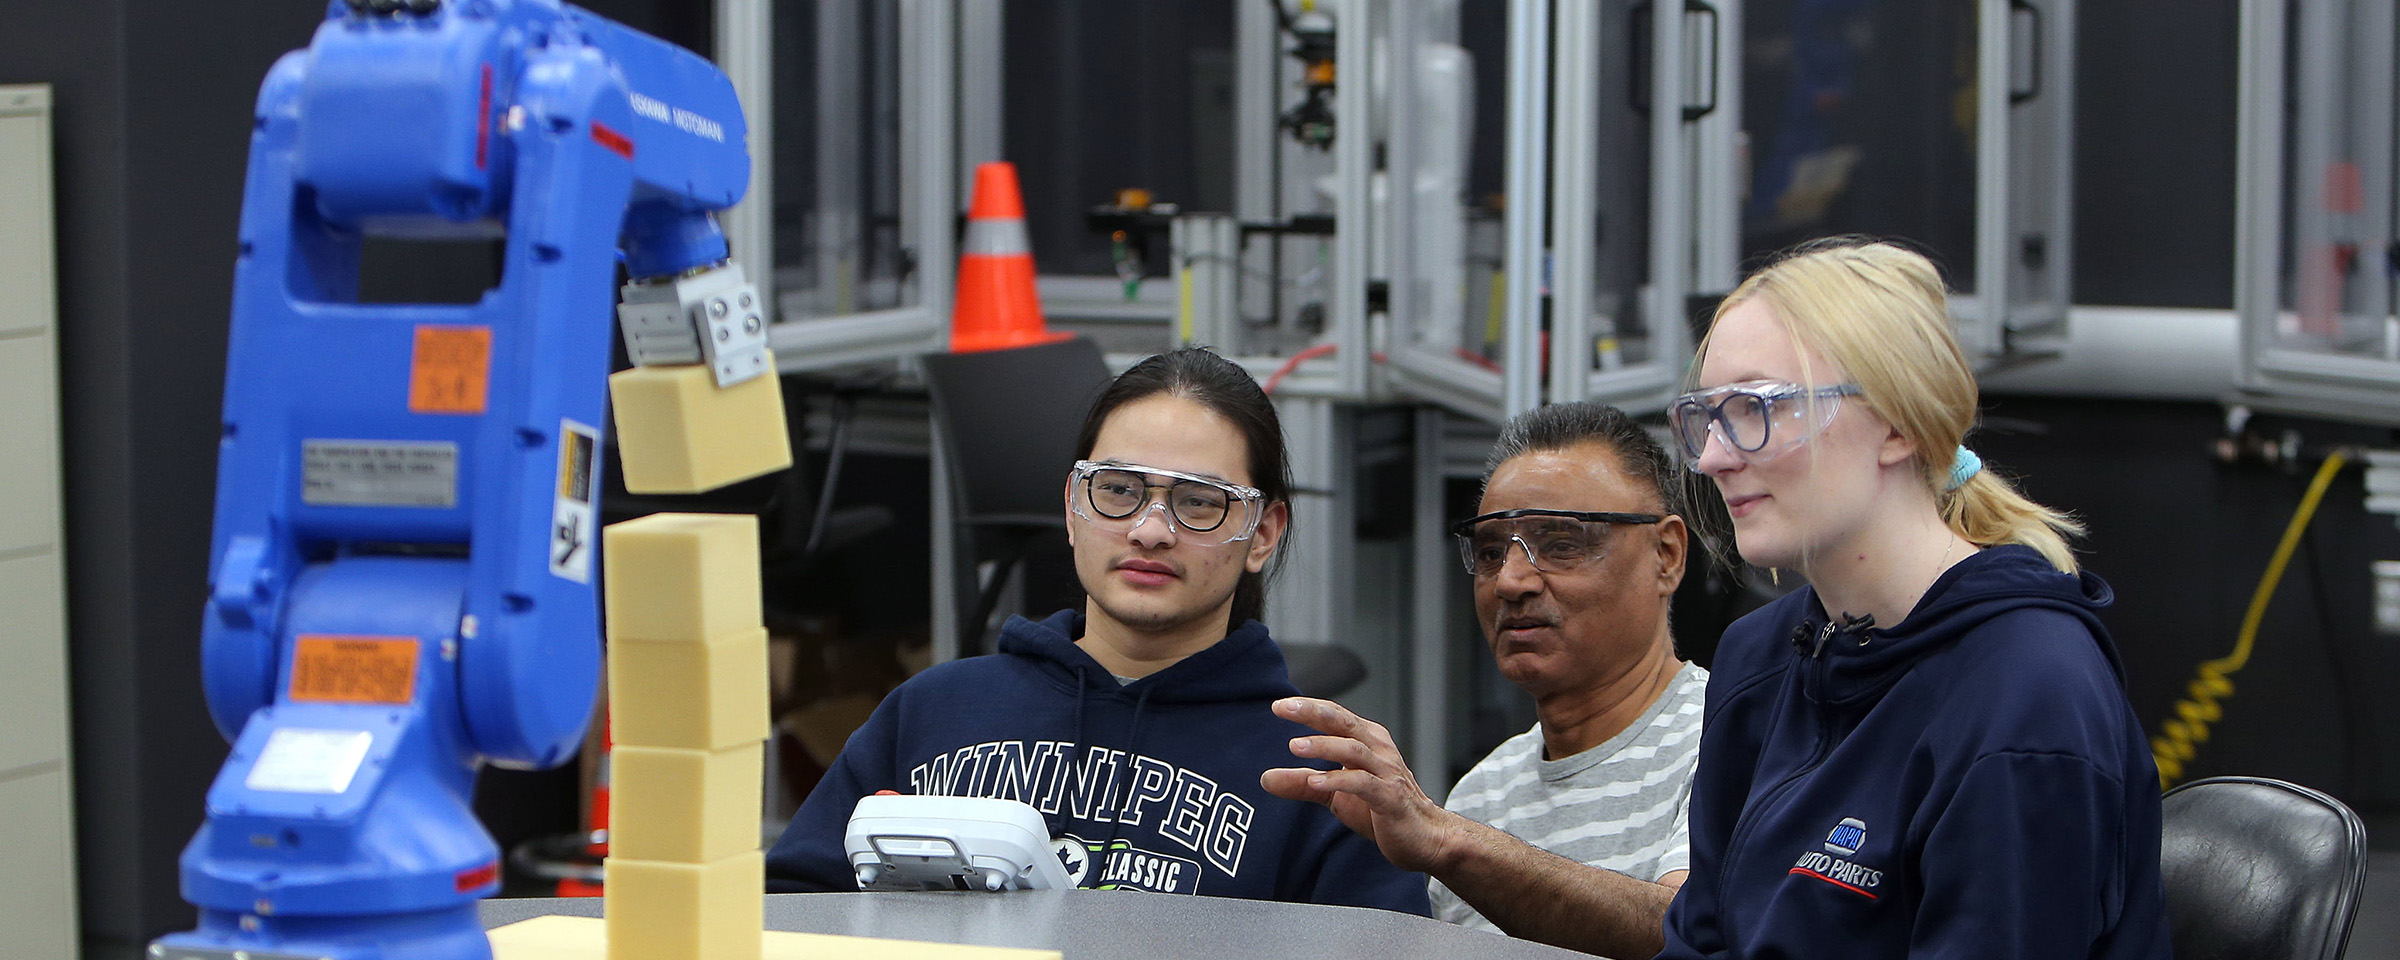 Students and instructor with machining equipment